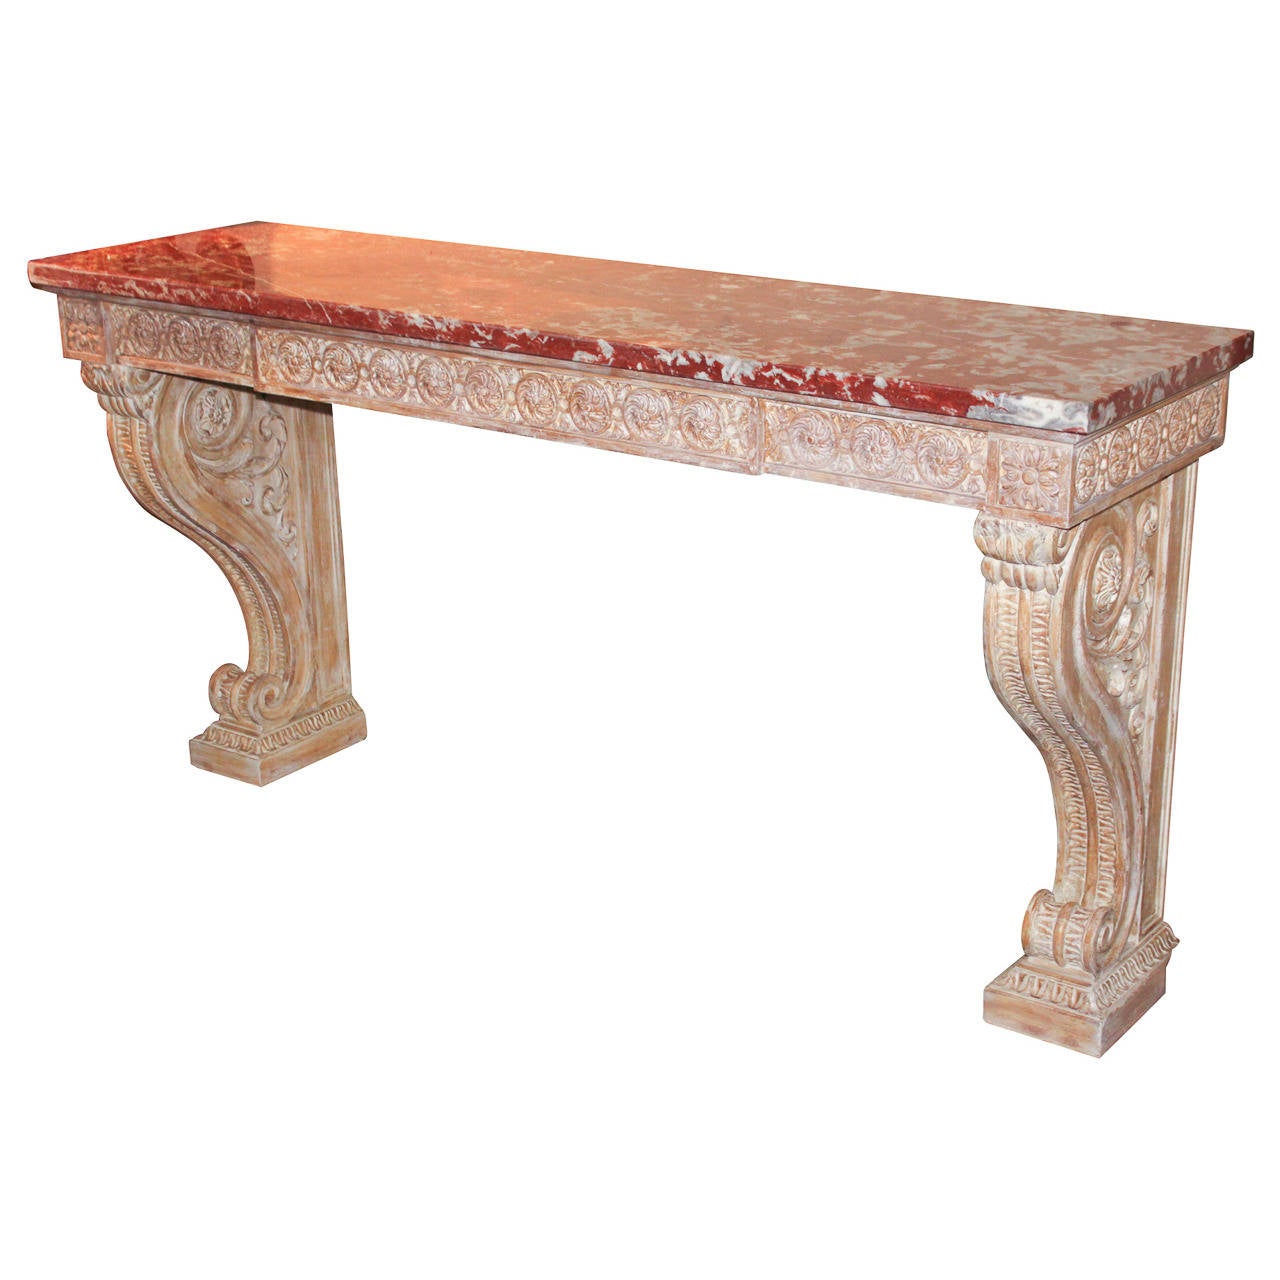 Beautiful hand-carved wood and gesso French Louis XIV console. Having lovely scrolling motif legs, rosette design across apron, and gorgeous rouge marble top. Ready for your designer touch!